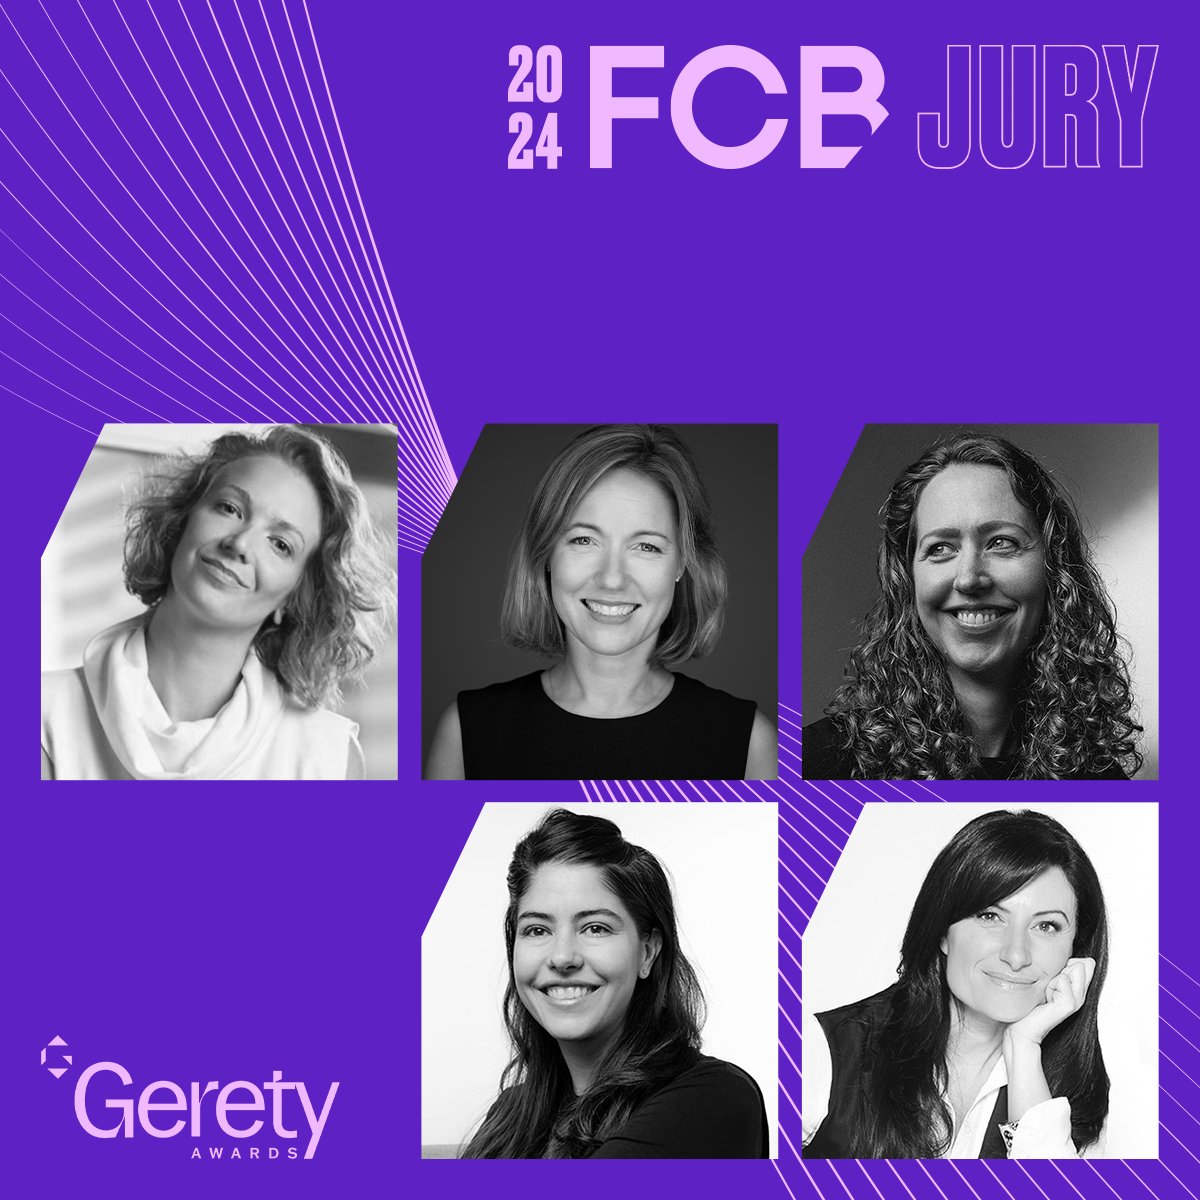 Five of FCB’s leaders have been named to the @GeretyAwards jury this year! Ana Becker, Emma Armstrong, Jessica Giles, Ana Noriega, and Nancy Crimi-Lamanna will join this esteemed group of women to select the best in advertising. #GeretyAwards2024